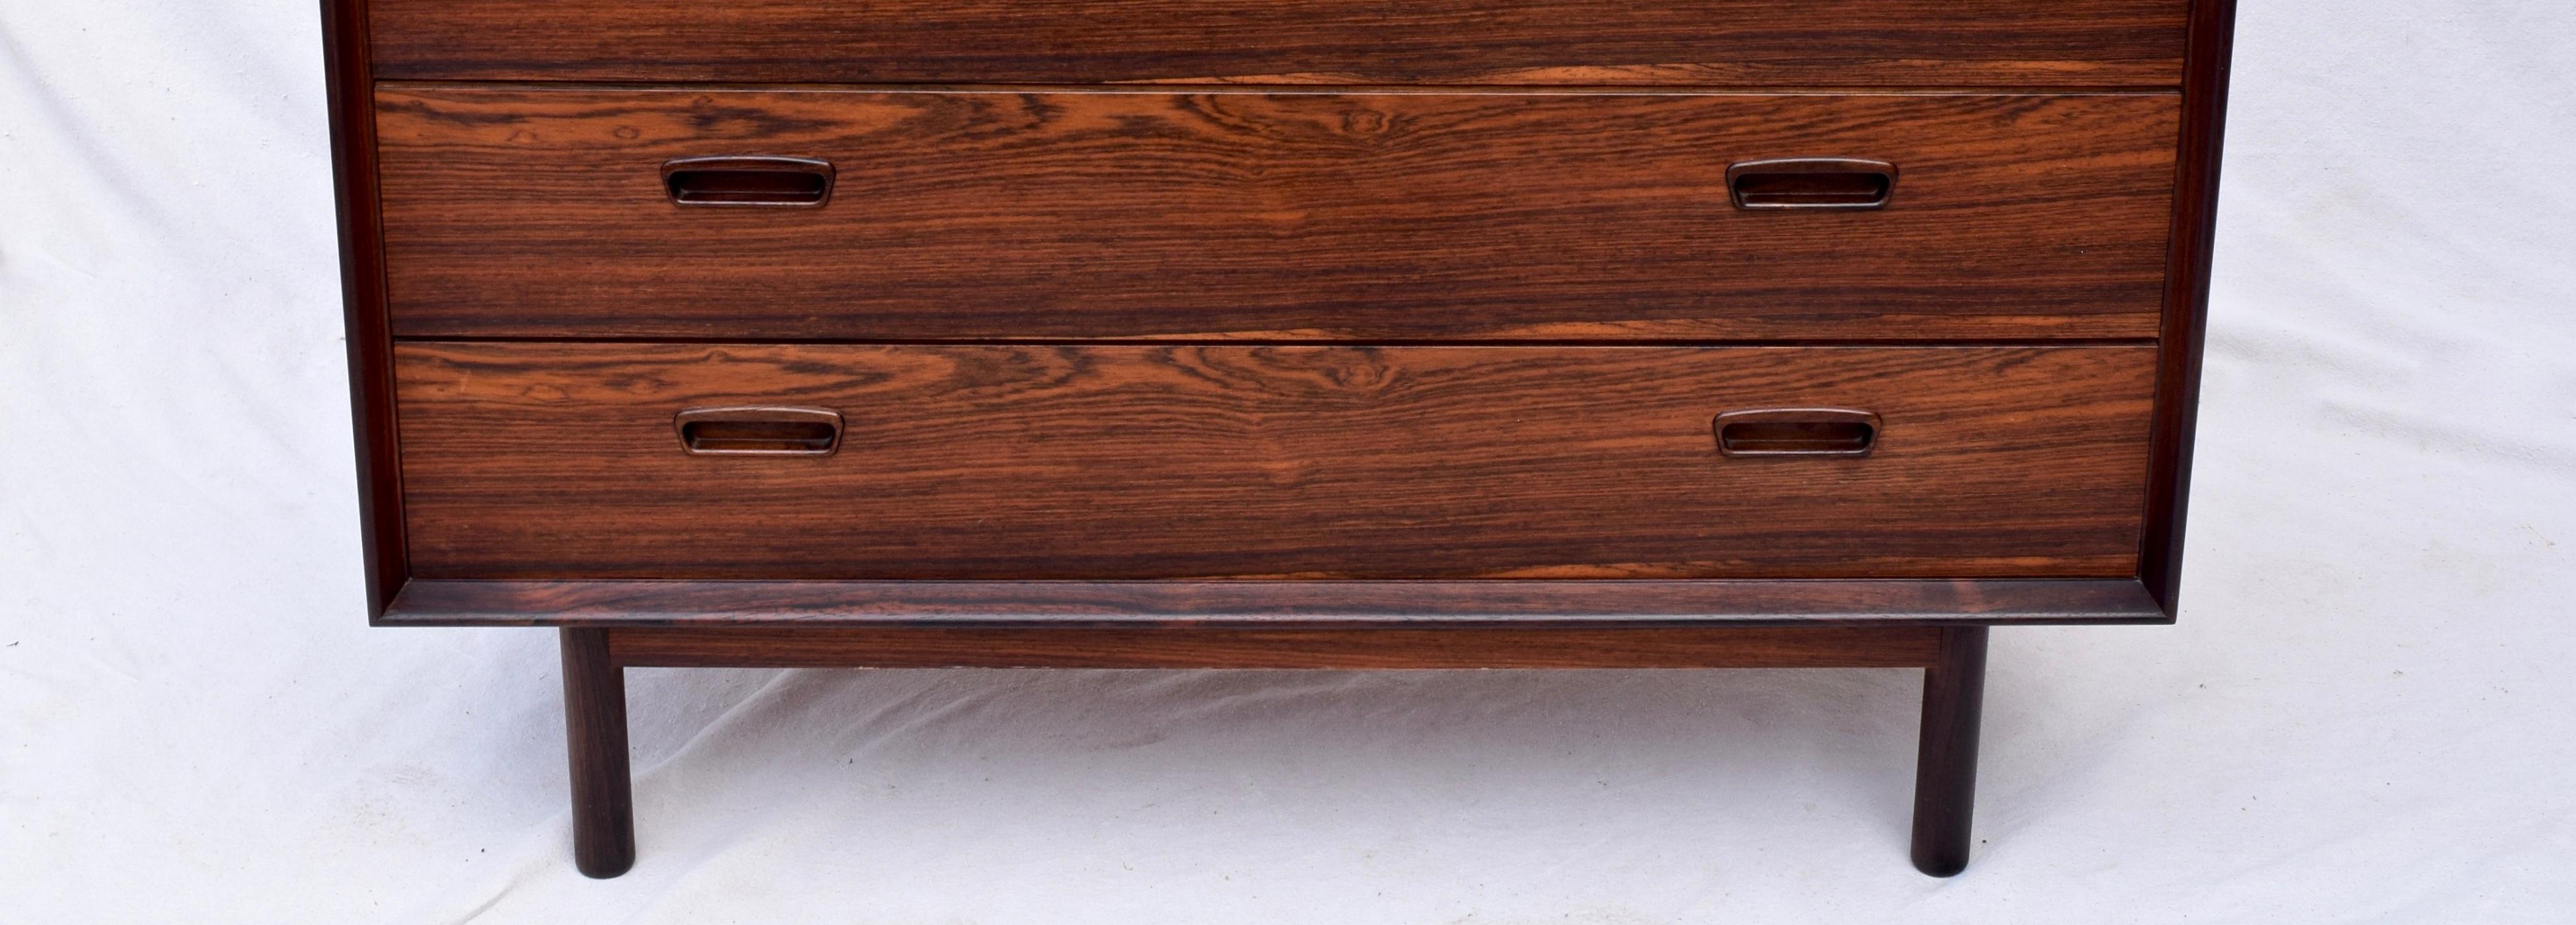 20th Century Poul Hundevad Rosewood Upright Chest of Drawers, 1960s